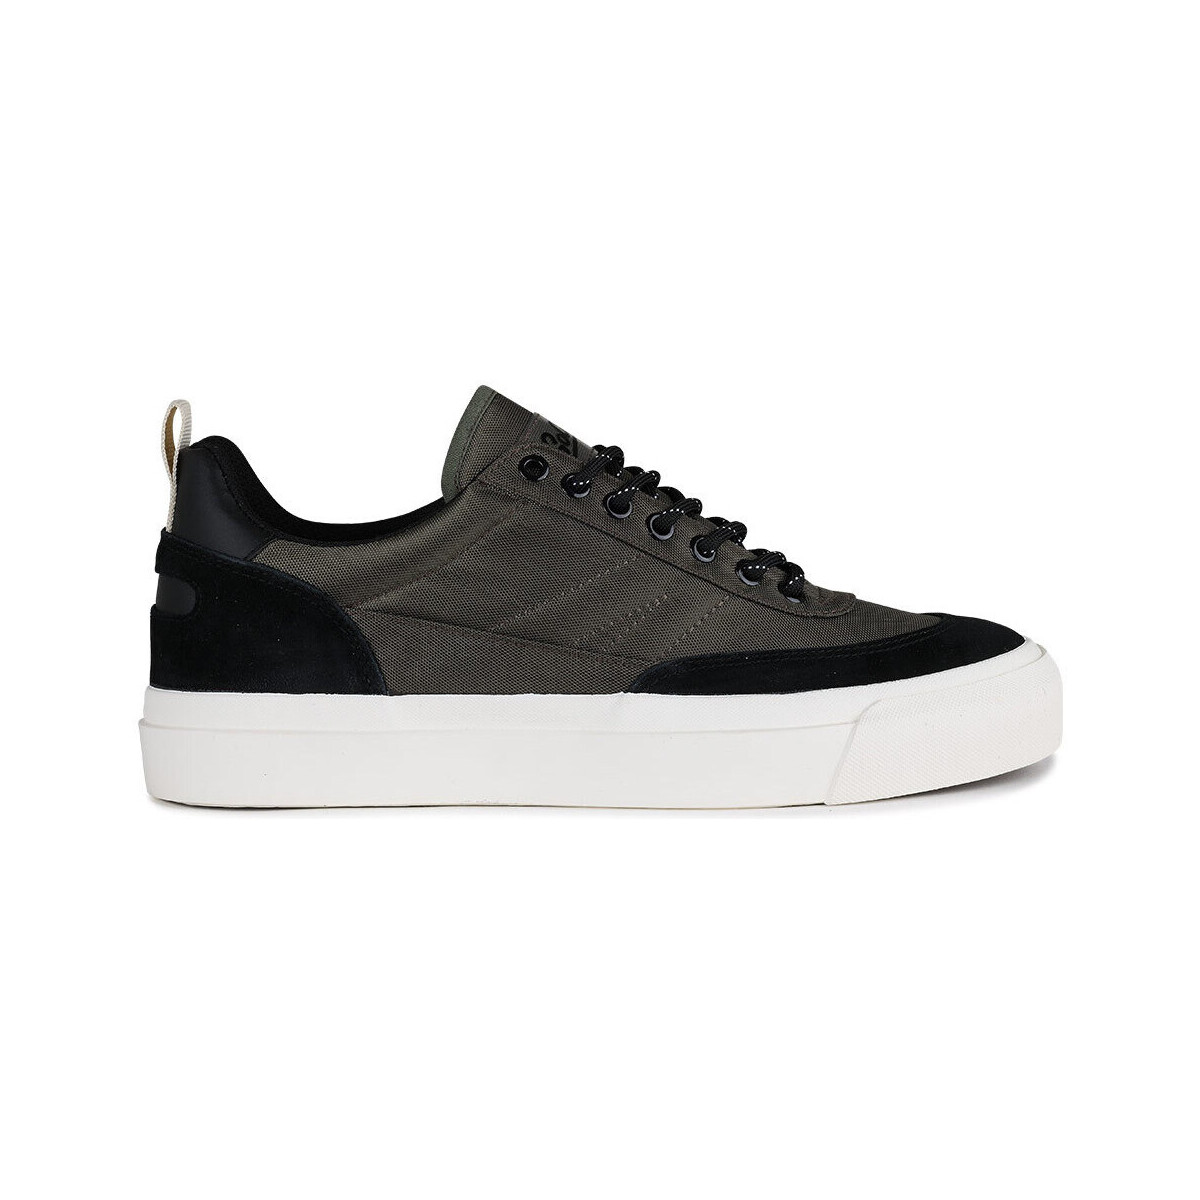 Chaussures Homme Baskets mode Goliath Number Three Vert